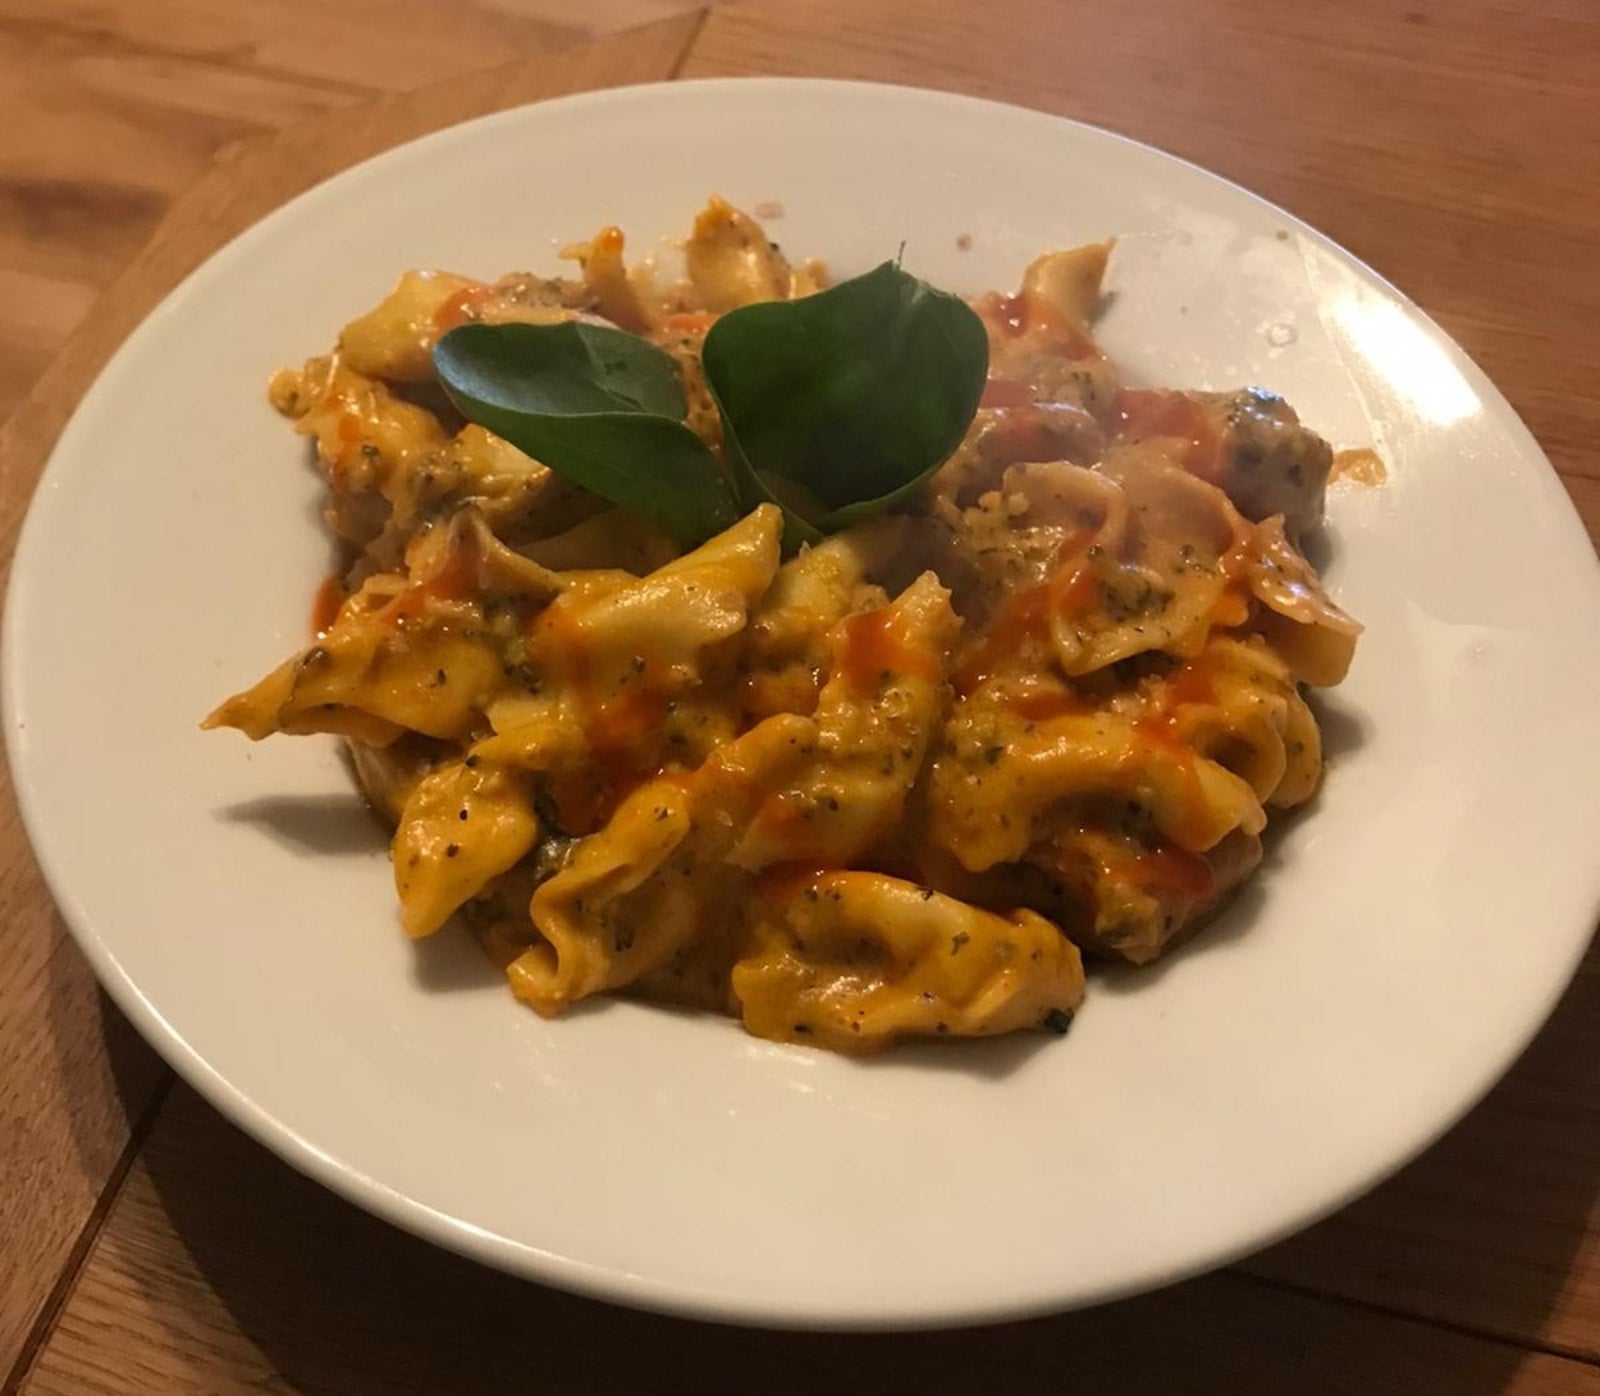 The Best of Our Customer Creations Series #1 - Sausage & Chillililli Tortellini